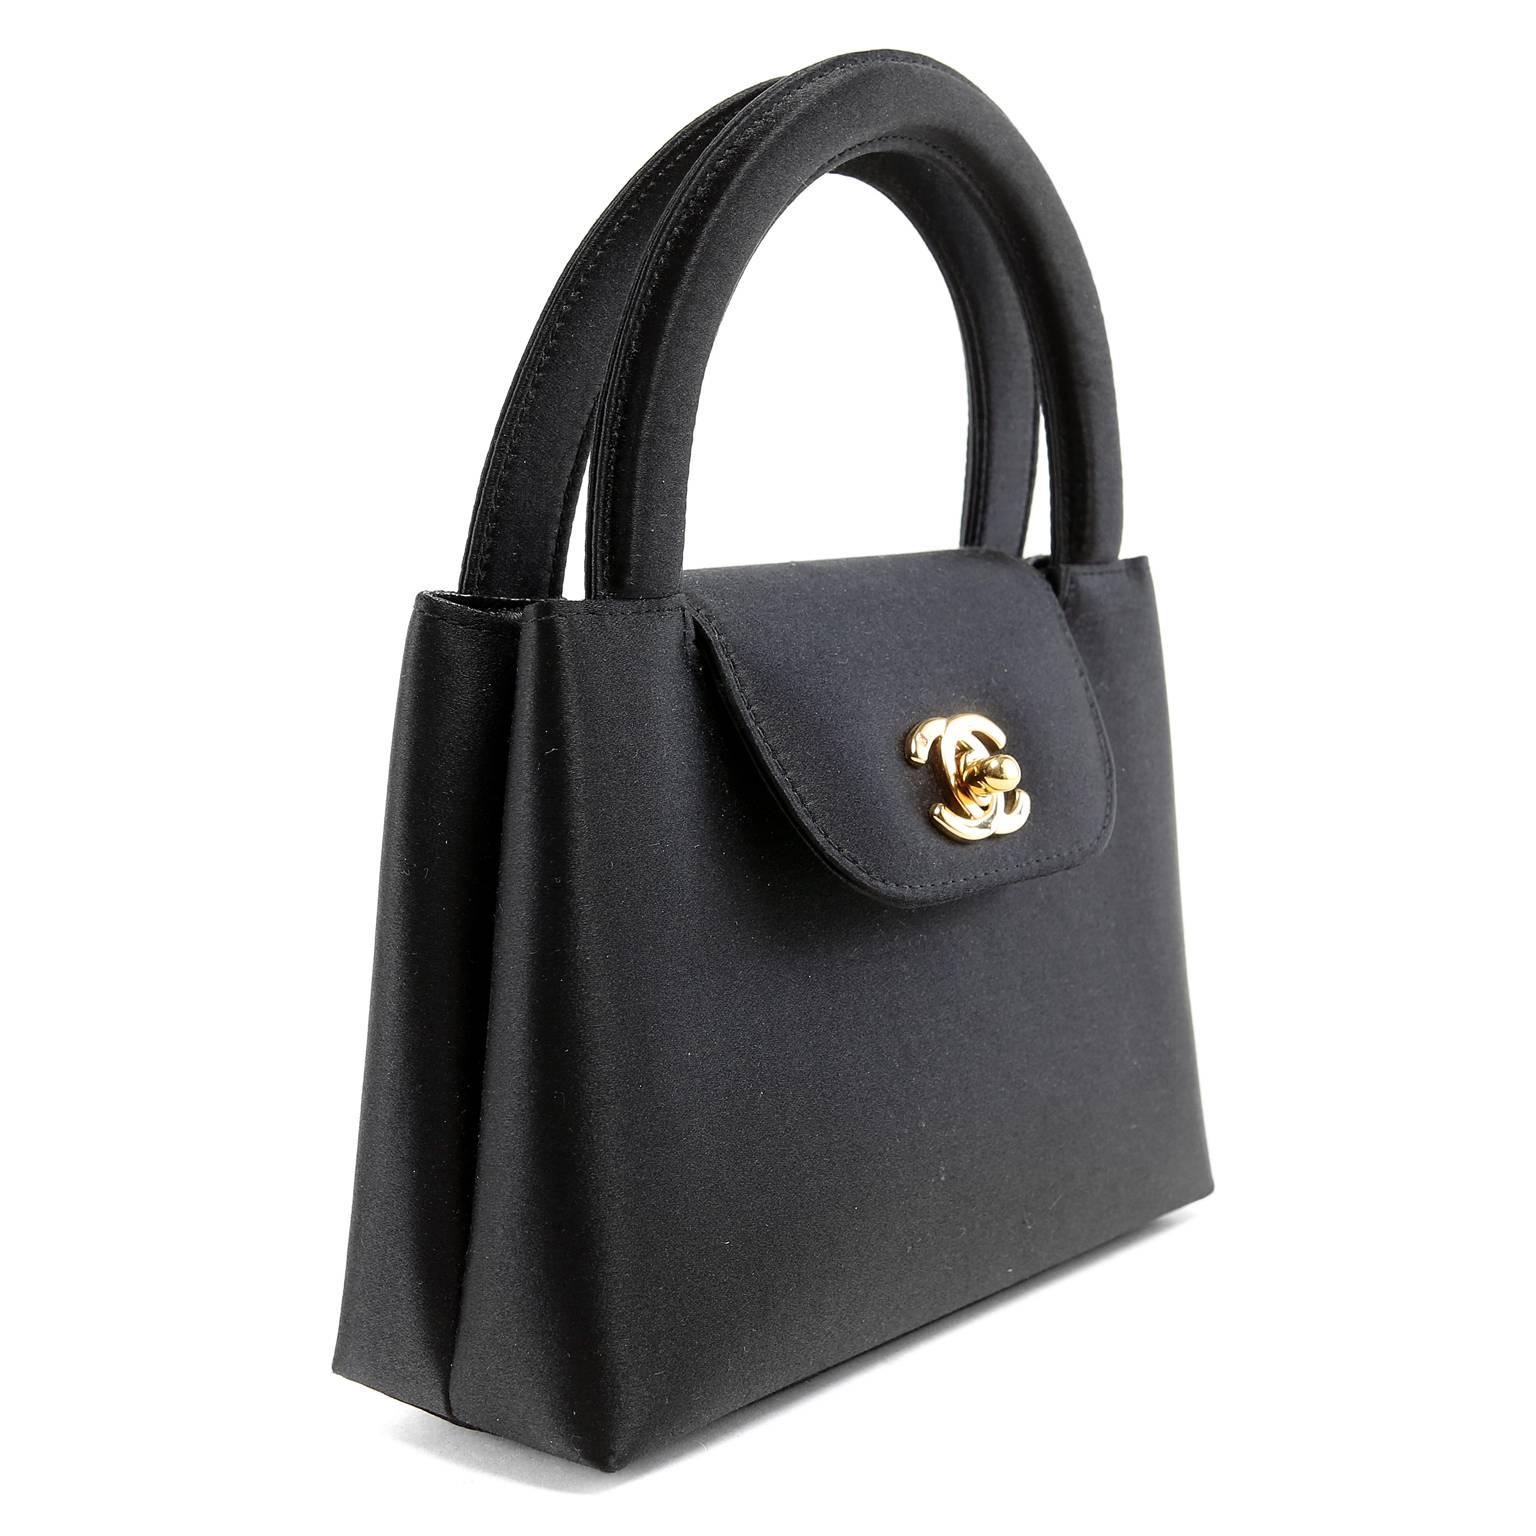 hanel Black Satin Evening Bag is in pristine condition.  Ladylike and refined, the sophisticated small bag is certain to be a go to piece for many years.
 
Black satin small bag has gold interlocking CC twist lock on front flap.  Black leather